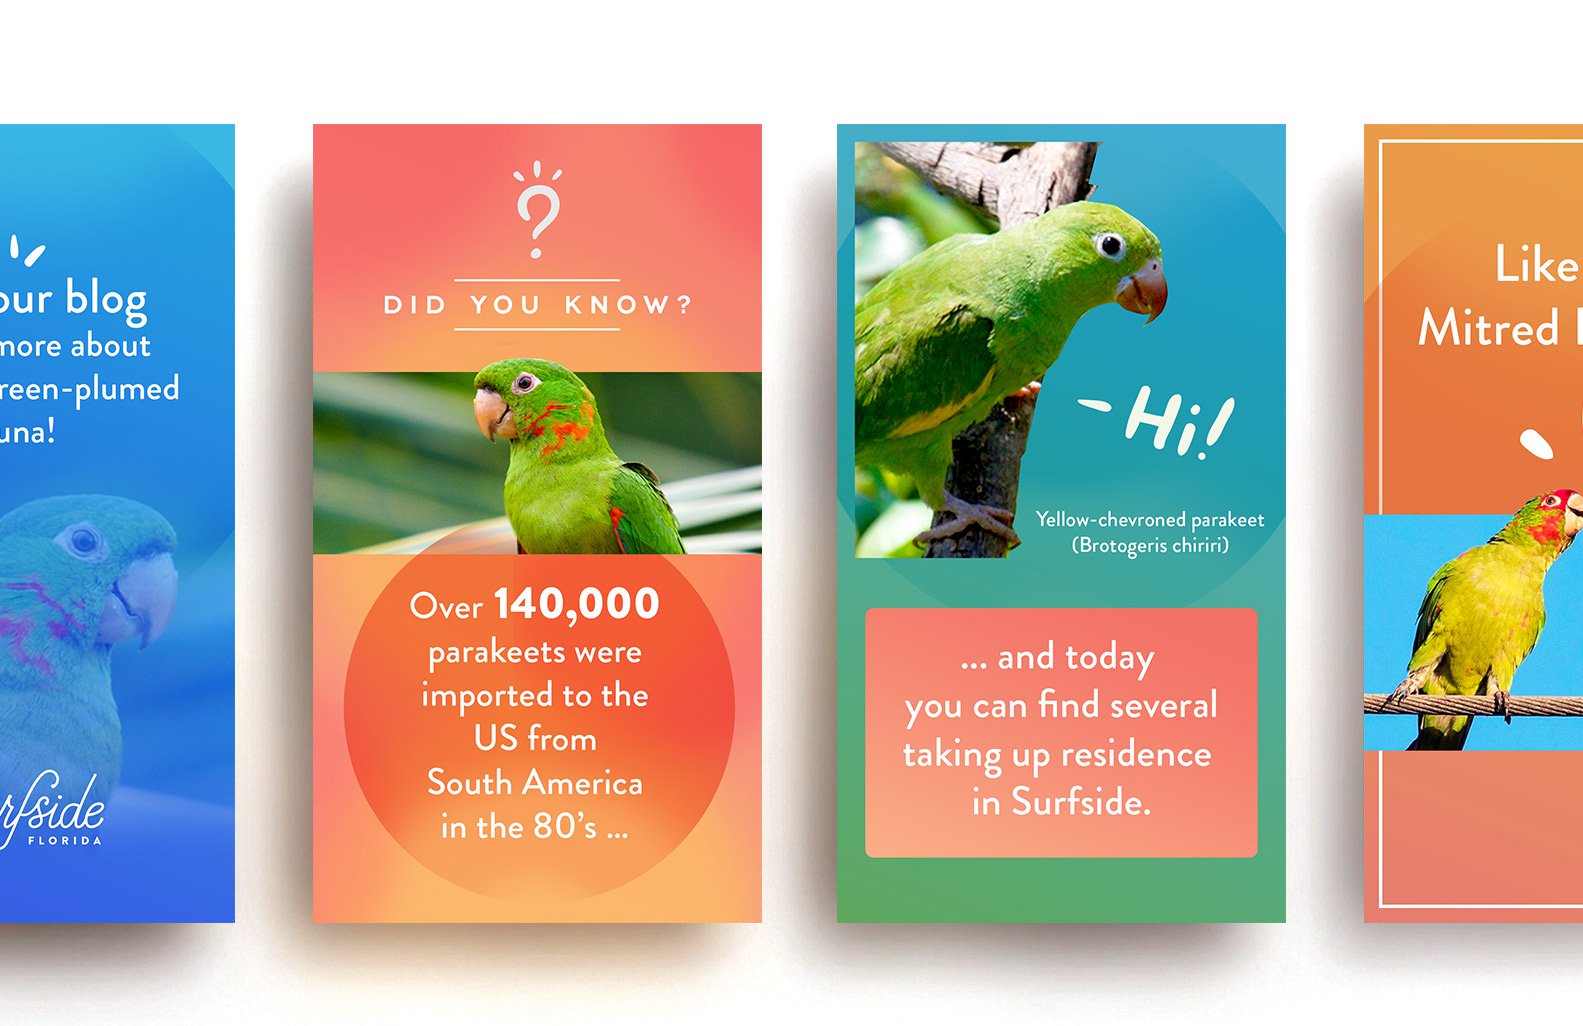 Jacober Creative Identity and Campaign for the Town of Surfside Florida - Photo Social Media stories design featuring Surfside birds